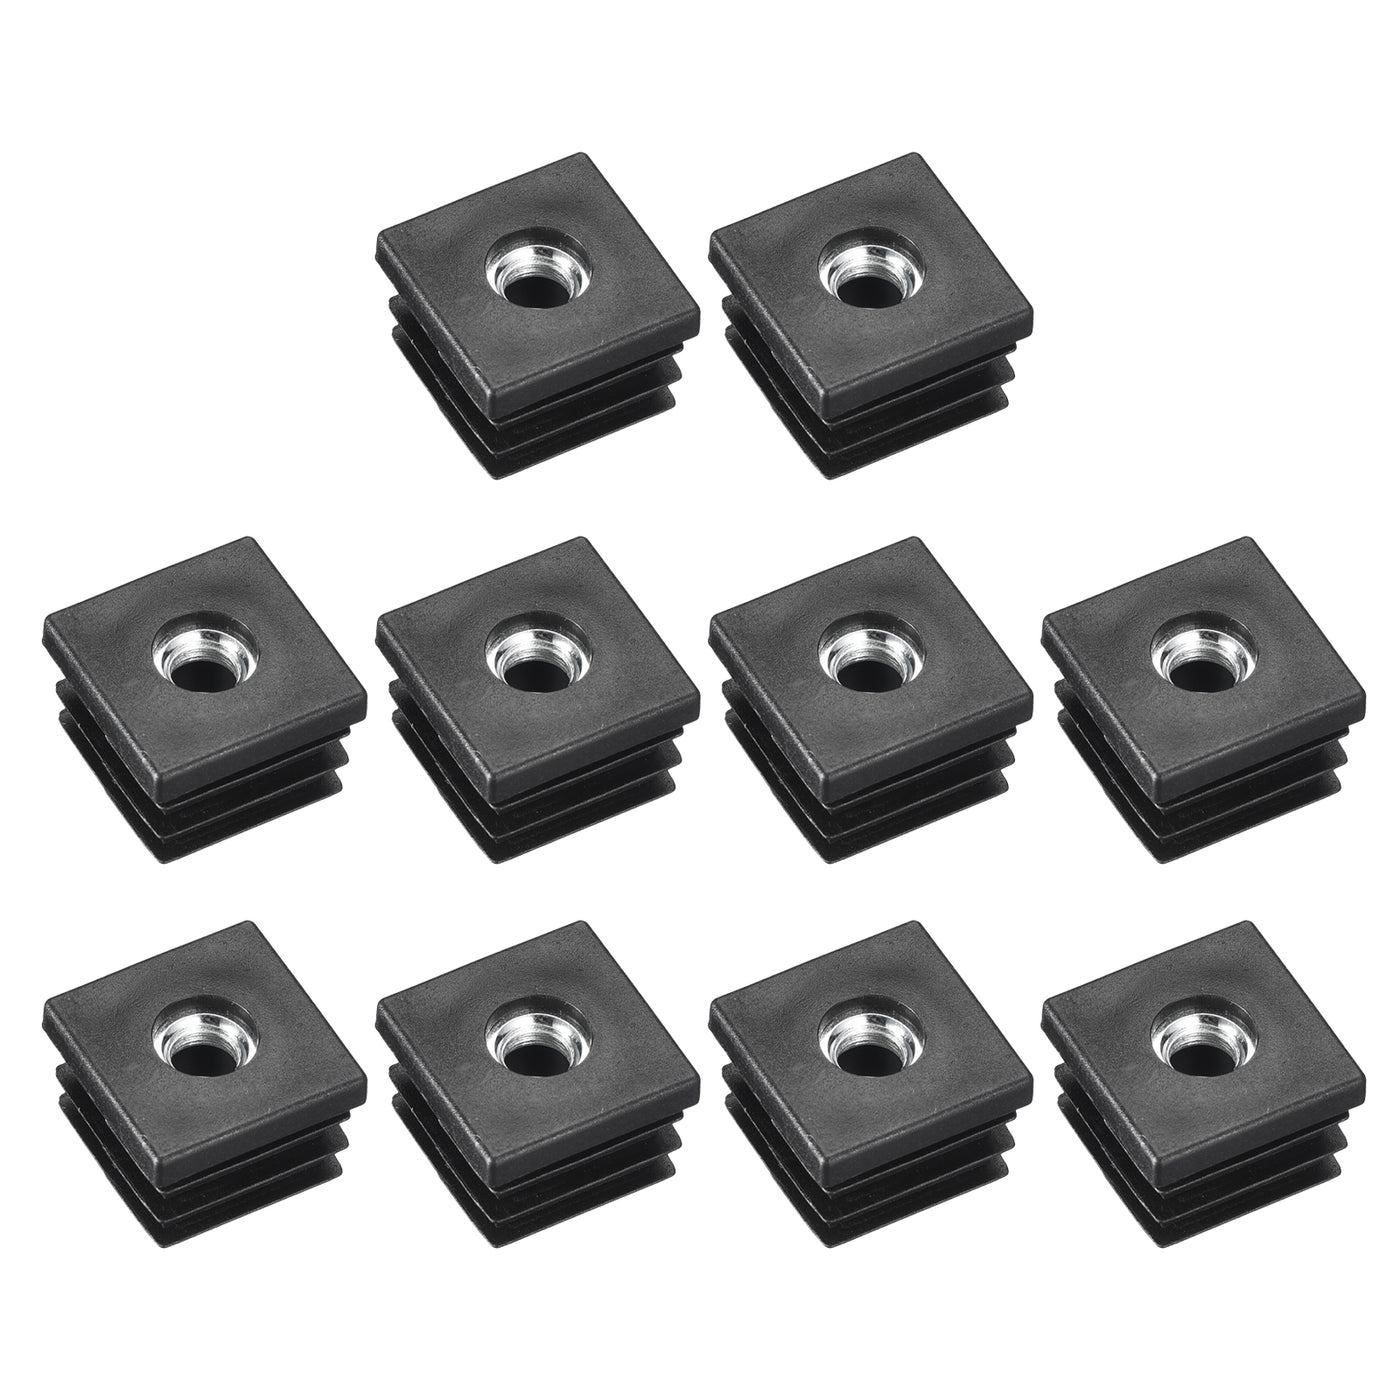 uxcell Uxcell 10Pcs 0.98"x0.98" Caster Insert with Thread, Square M8 Thread for Furniture